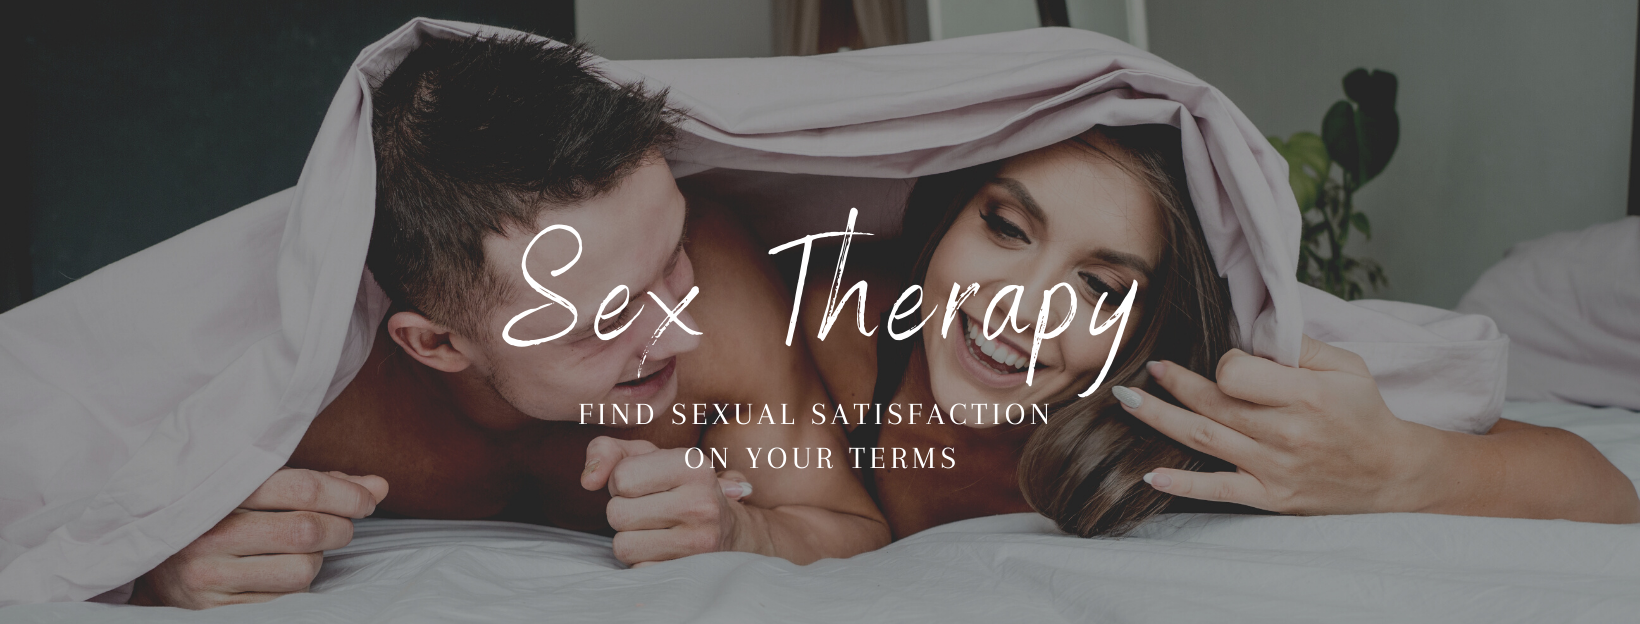 sex therapy for married couples Fucking Pics Hq